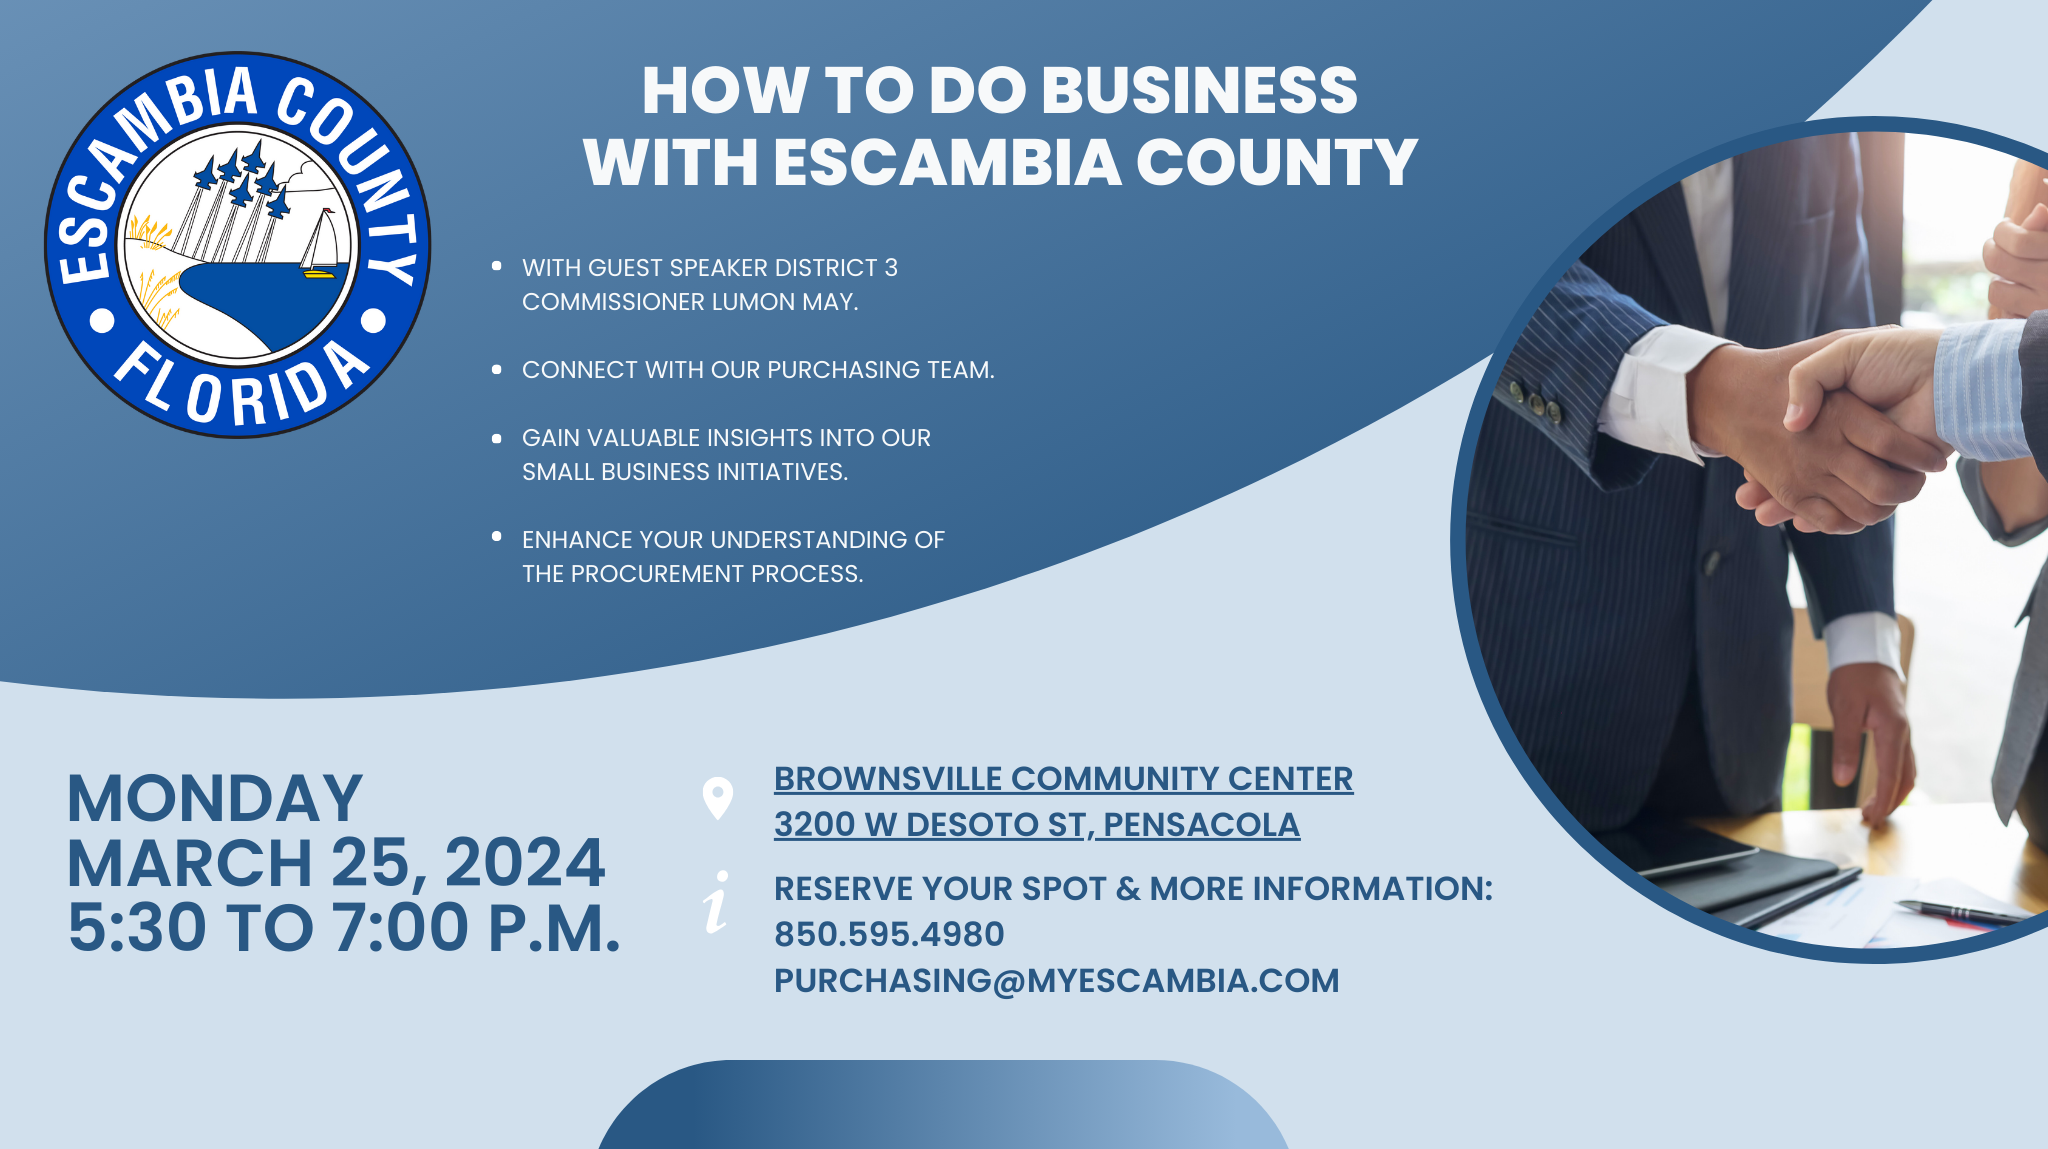 How to do business with Escambia County